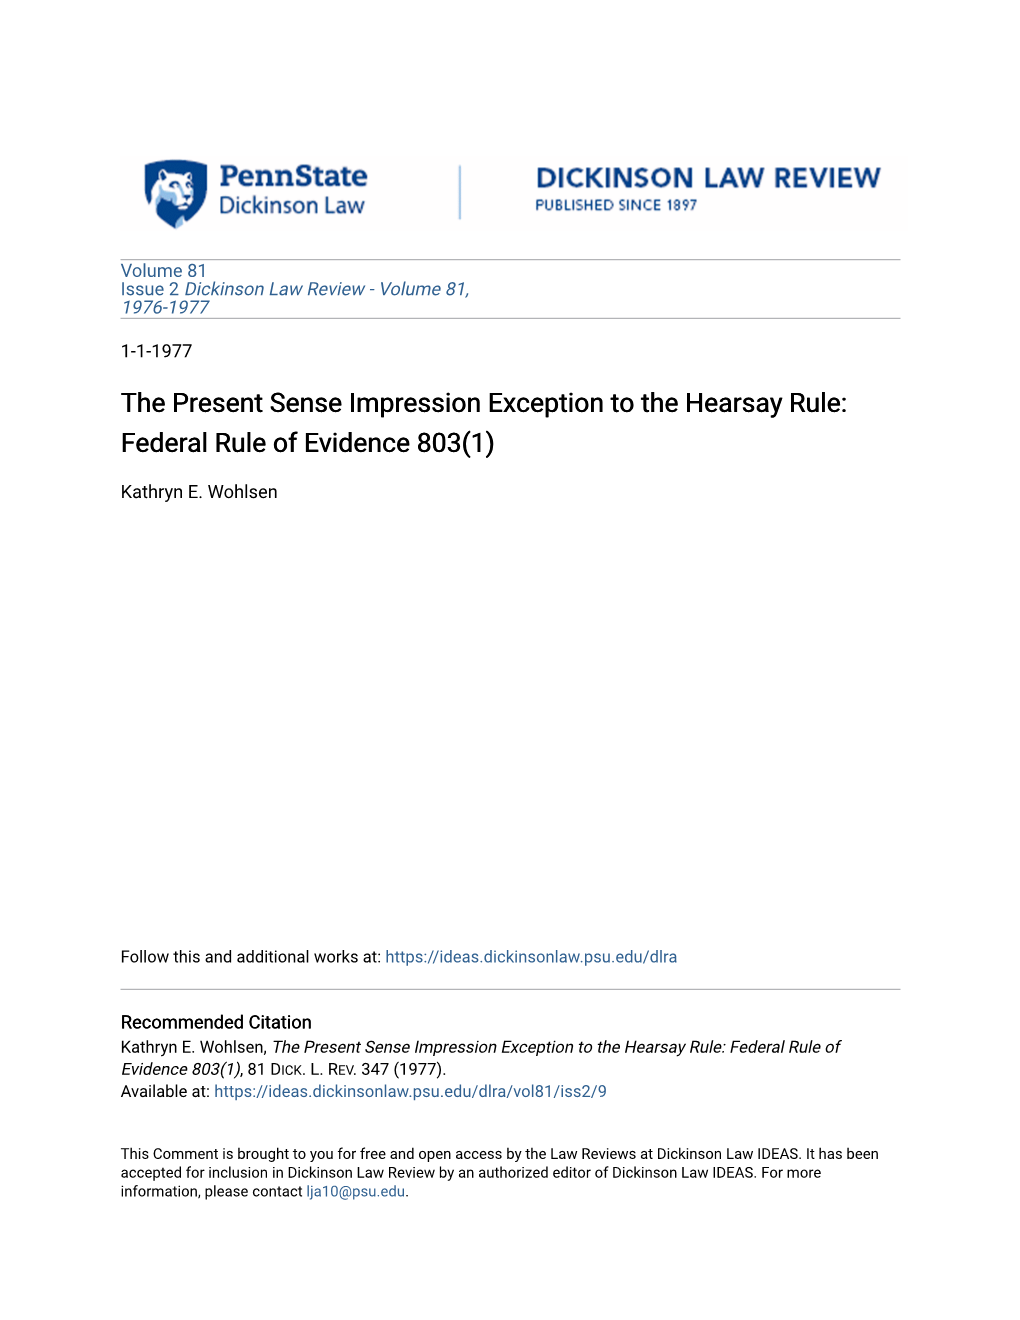 The Present Sense Impression Exception to the Hearsay Rule: Federal Rule of Evidence 803(1)